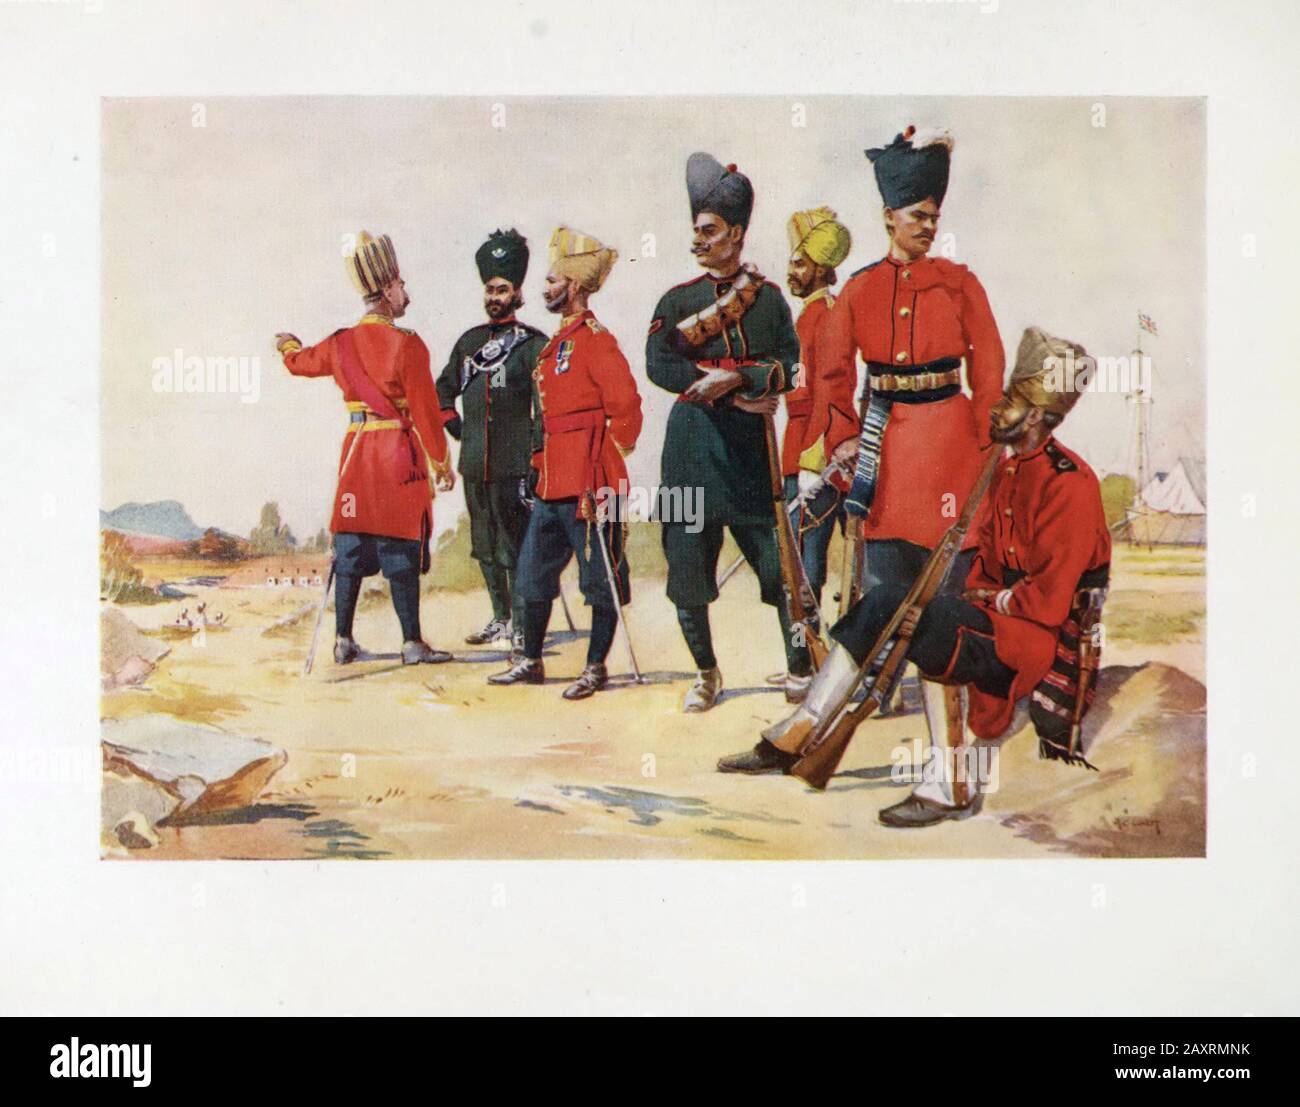 Armies of India. By major A.C. Lovett. London. 1911. Rajputana Infantry 113th Infantry. 104th Wellesley's Rifles. 119th Infantry. 123rd Outram's Rifle Stock Photo